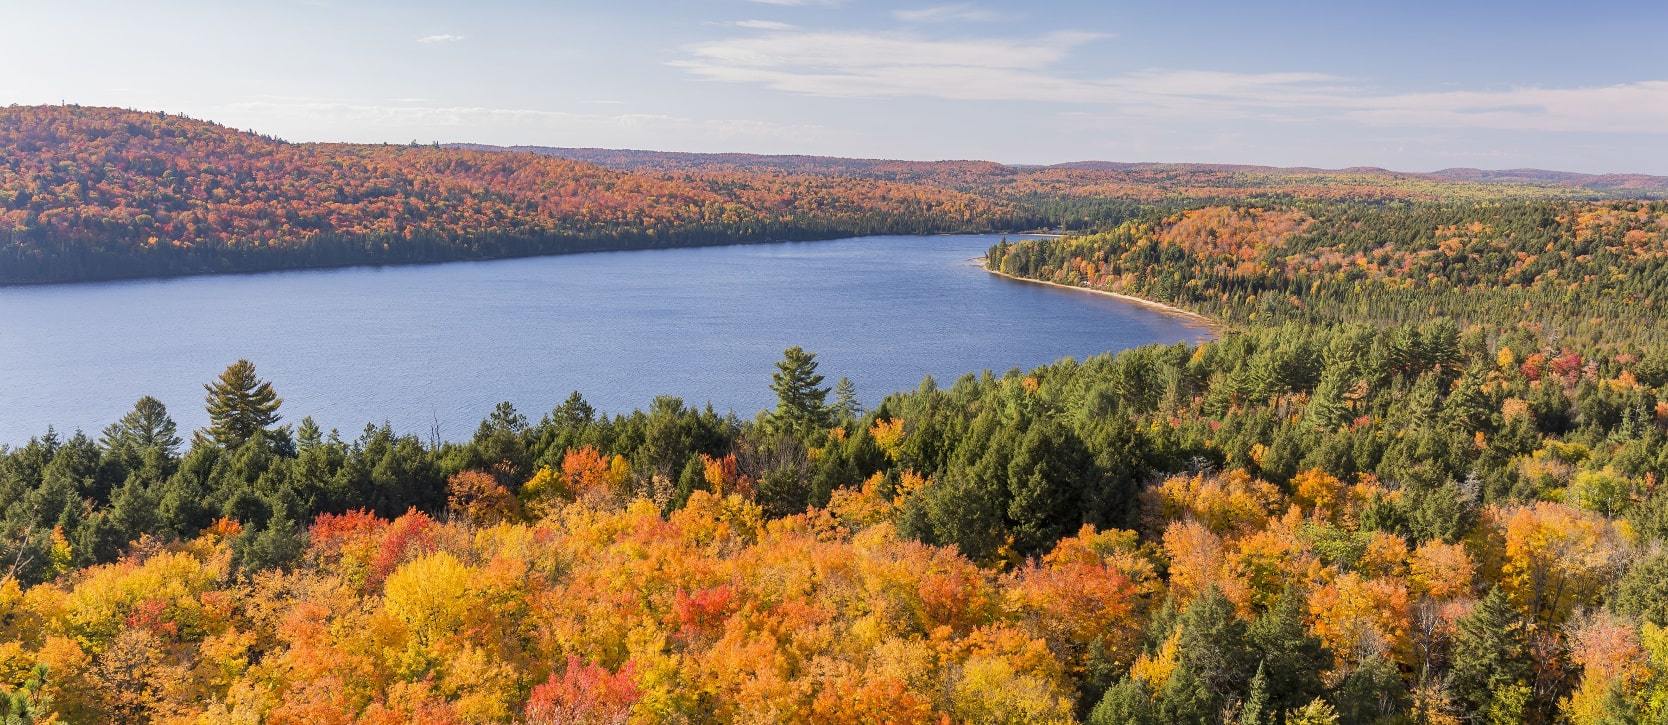 Panoramic view over the orange, yellow, and green trees and lakes of the Haliburton area